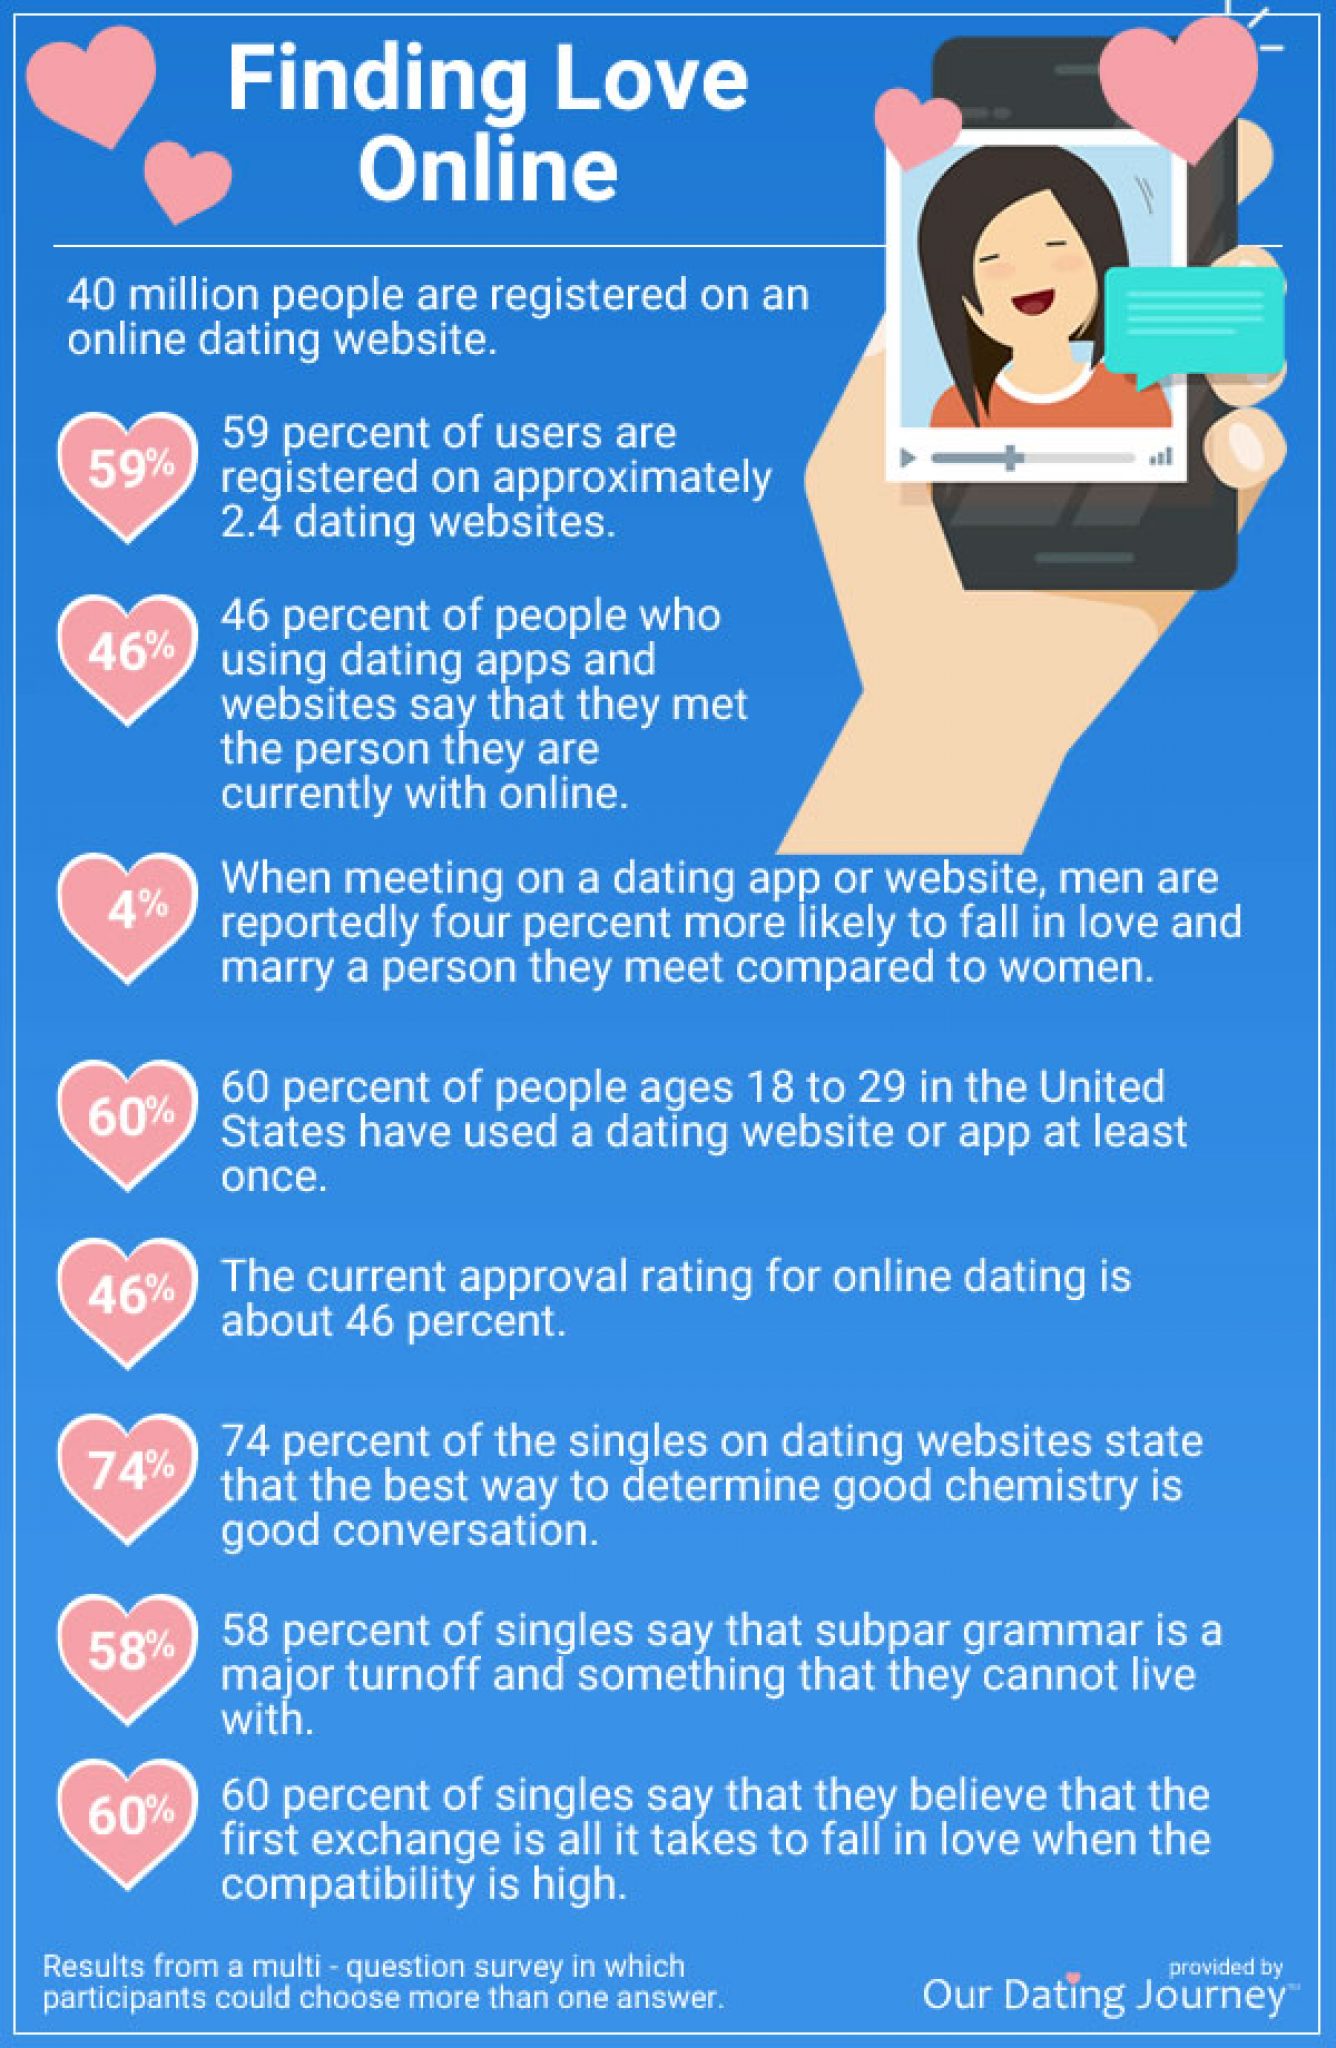 highest online dating state in